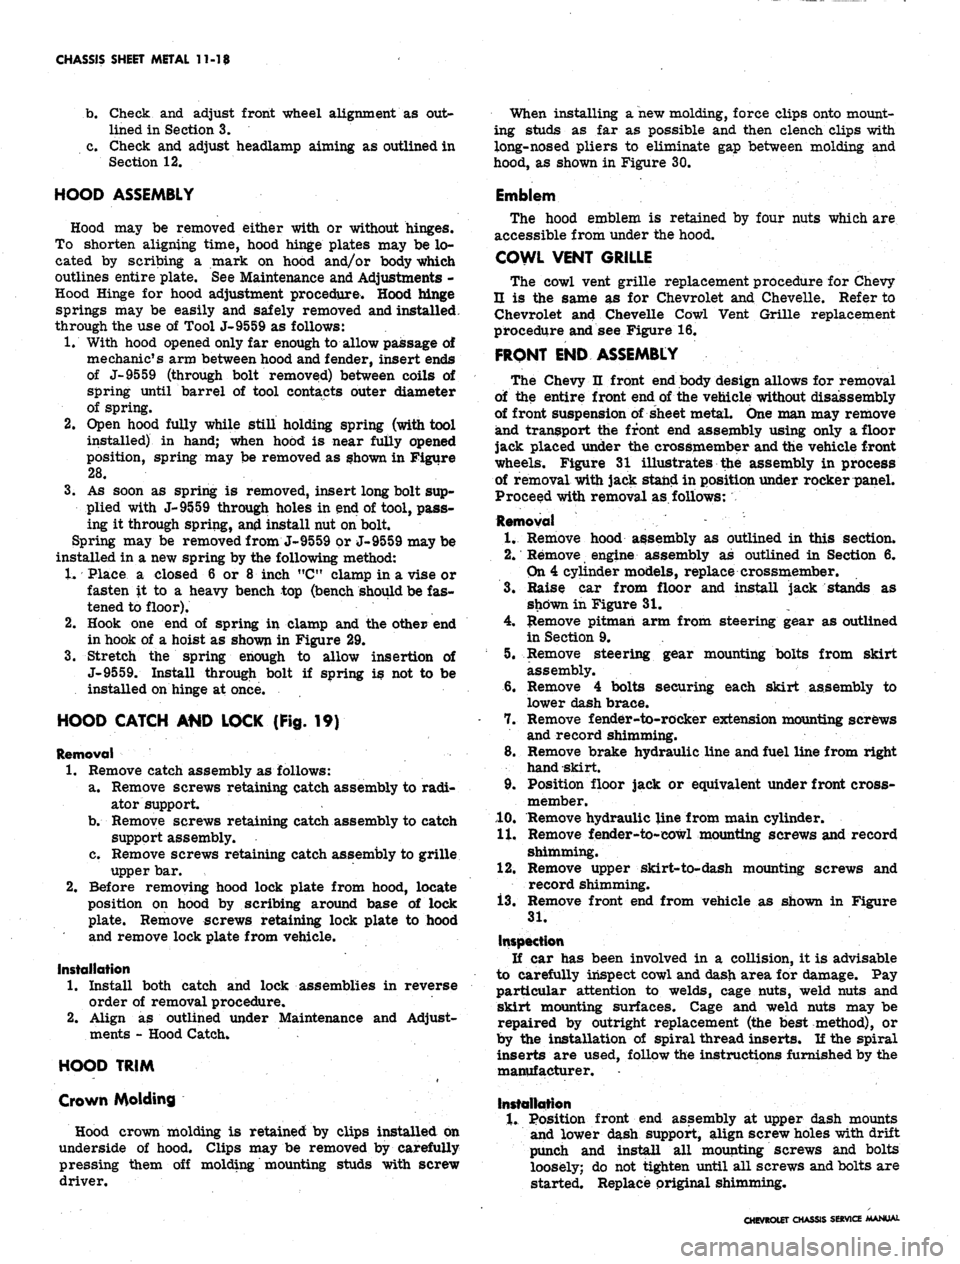 CHEVROLET CAMARO 1967 1.G Chassis Workshop Manual 
CHASSIS SHEET METAL 11-18

b.
 Check and adjust front wheel alignment as out-

lined in Section 3.

c. Check and adjust headlamp aiming as outlined in

Section 12.

HOOD ASSEMBLY

Hood may be removed